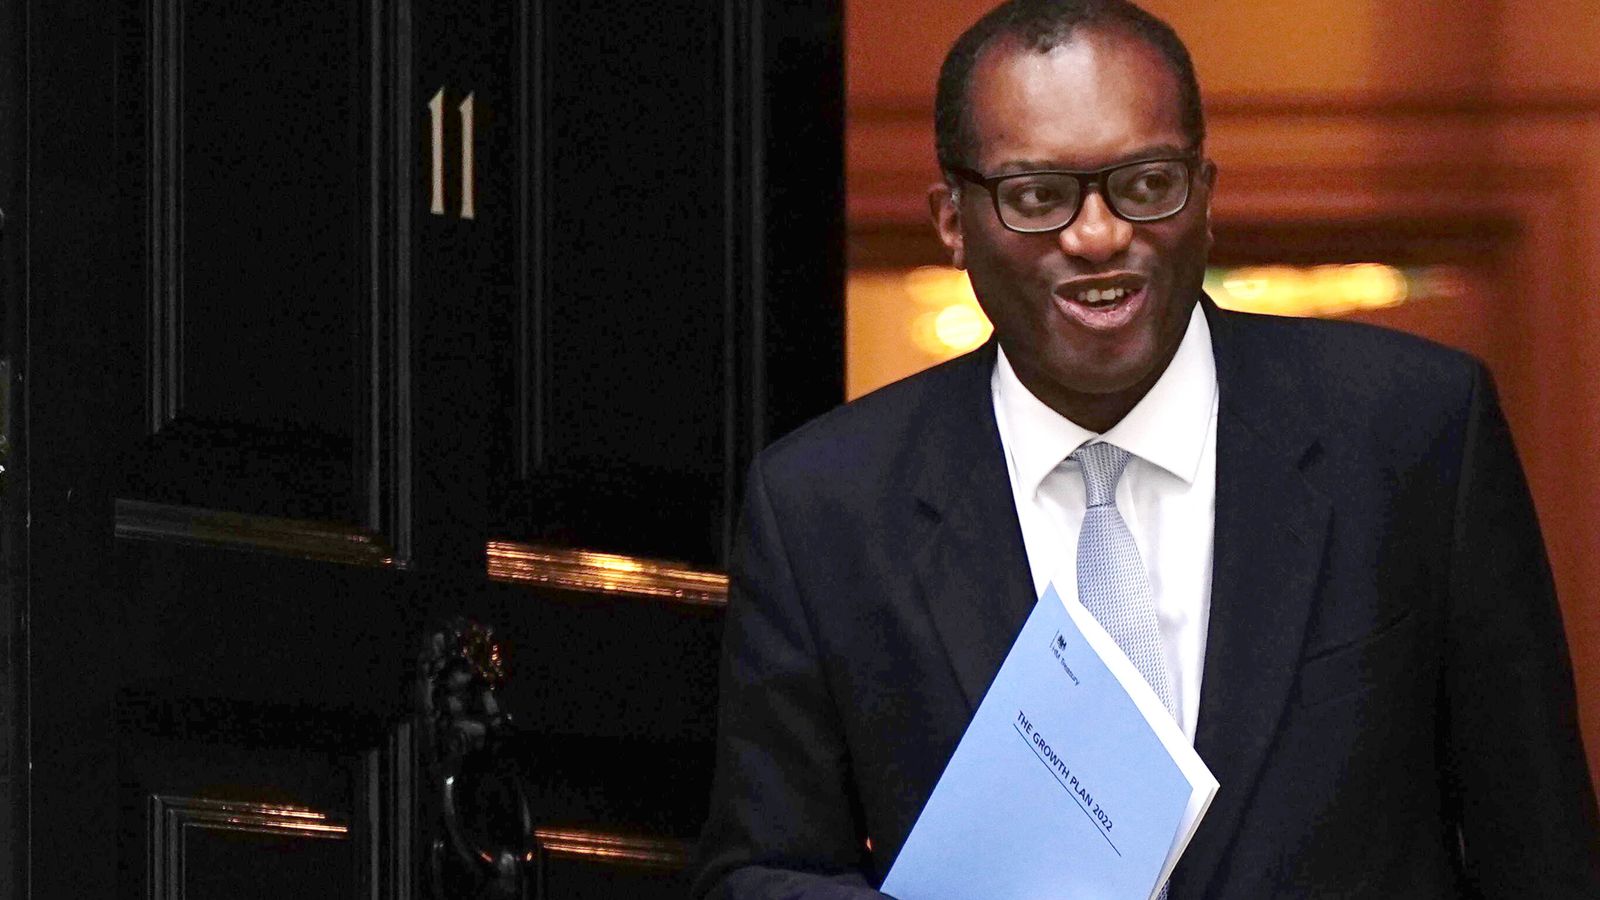 Kwasi Kwarteng faces calls for inquiry after attending champagne party with hedge fund managers hours after delivering mini-budget